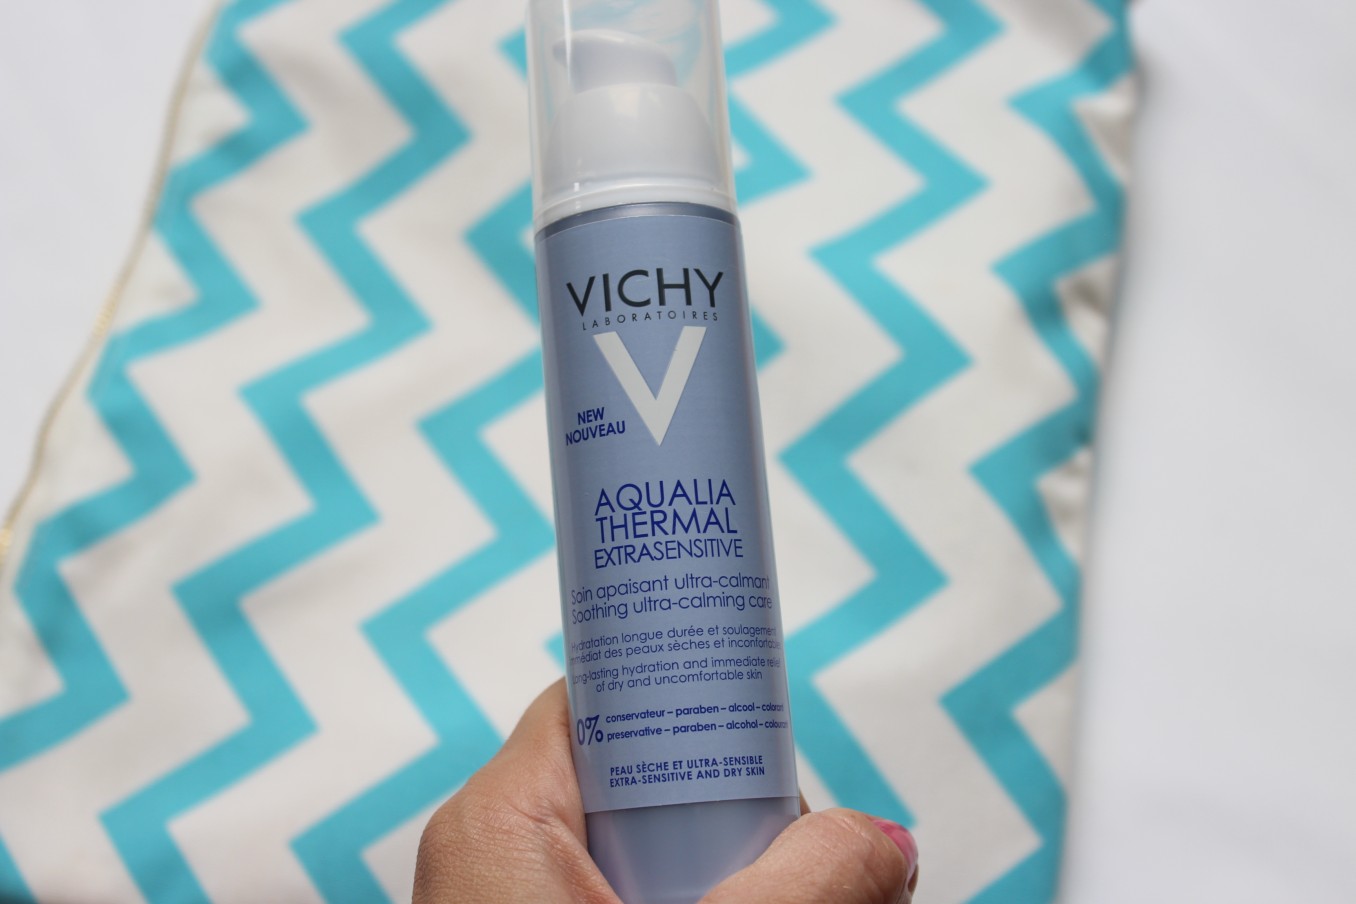 Review of Vichy Aqualia Thermal Extrasensitive